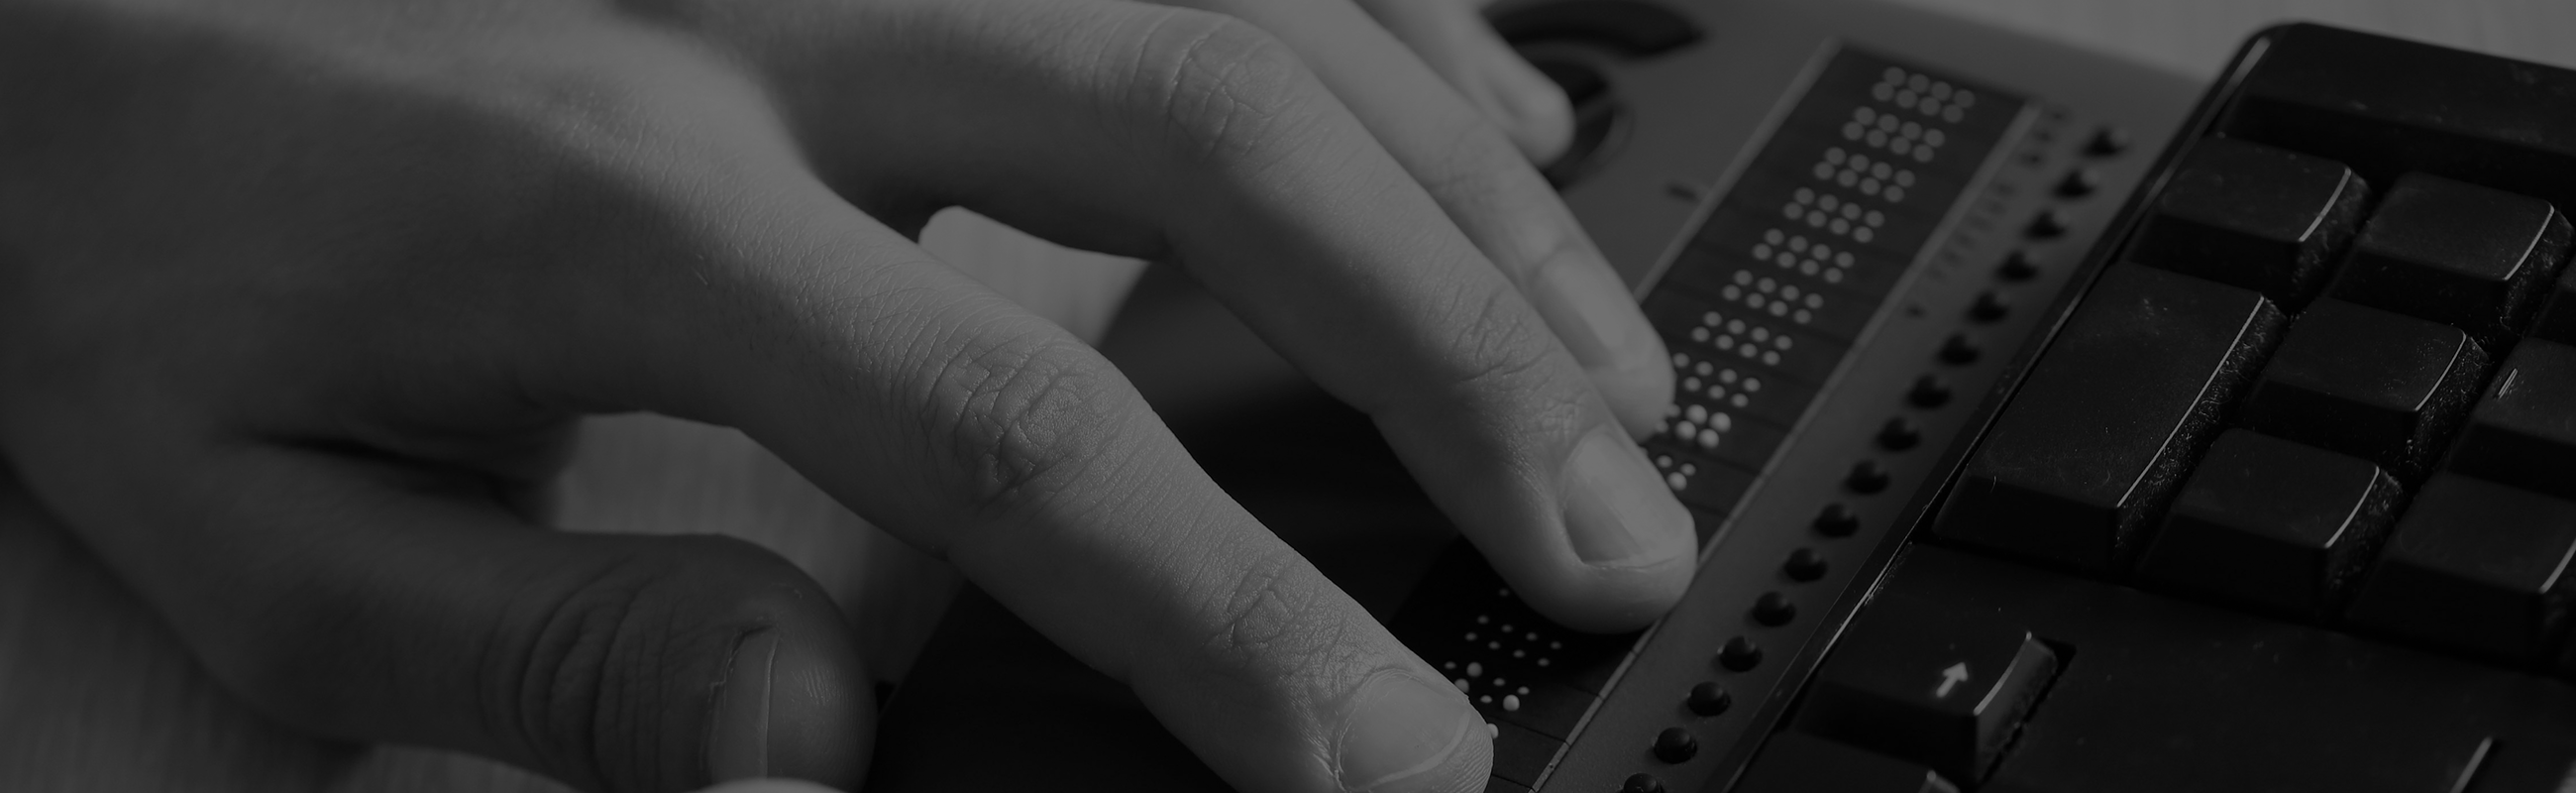 photo of fingers touching braille keyboard